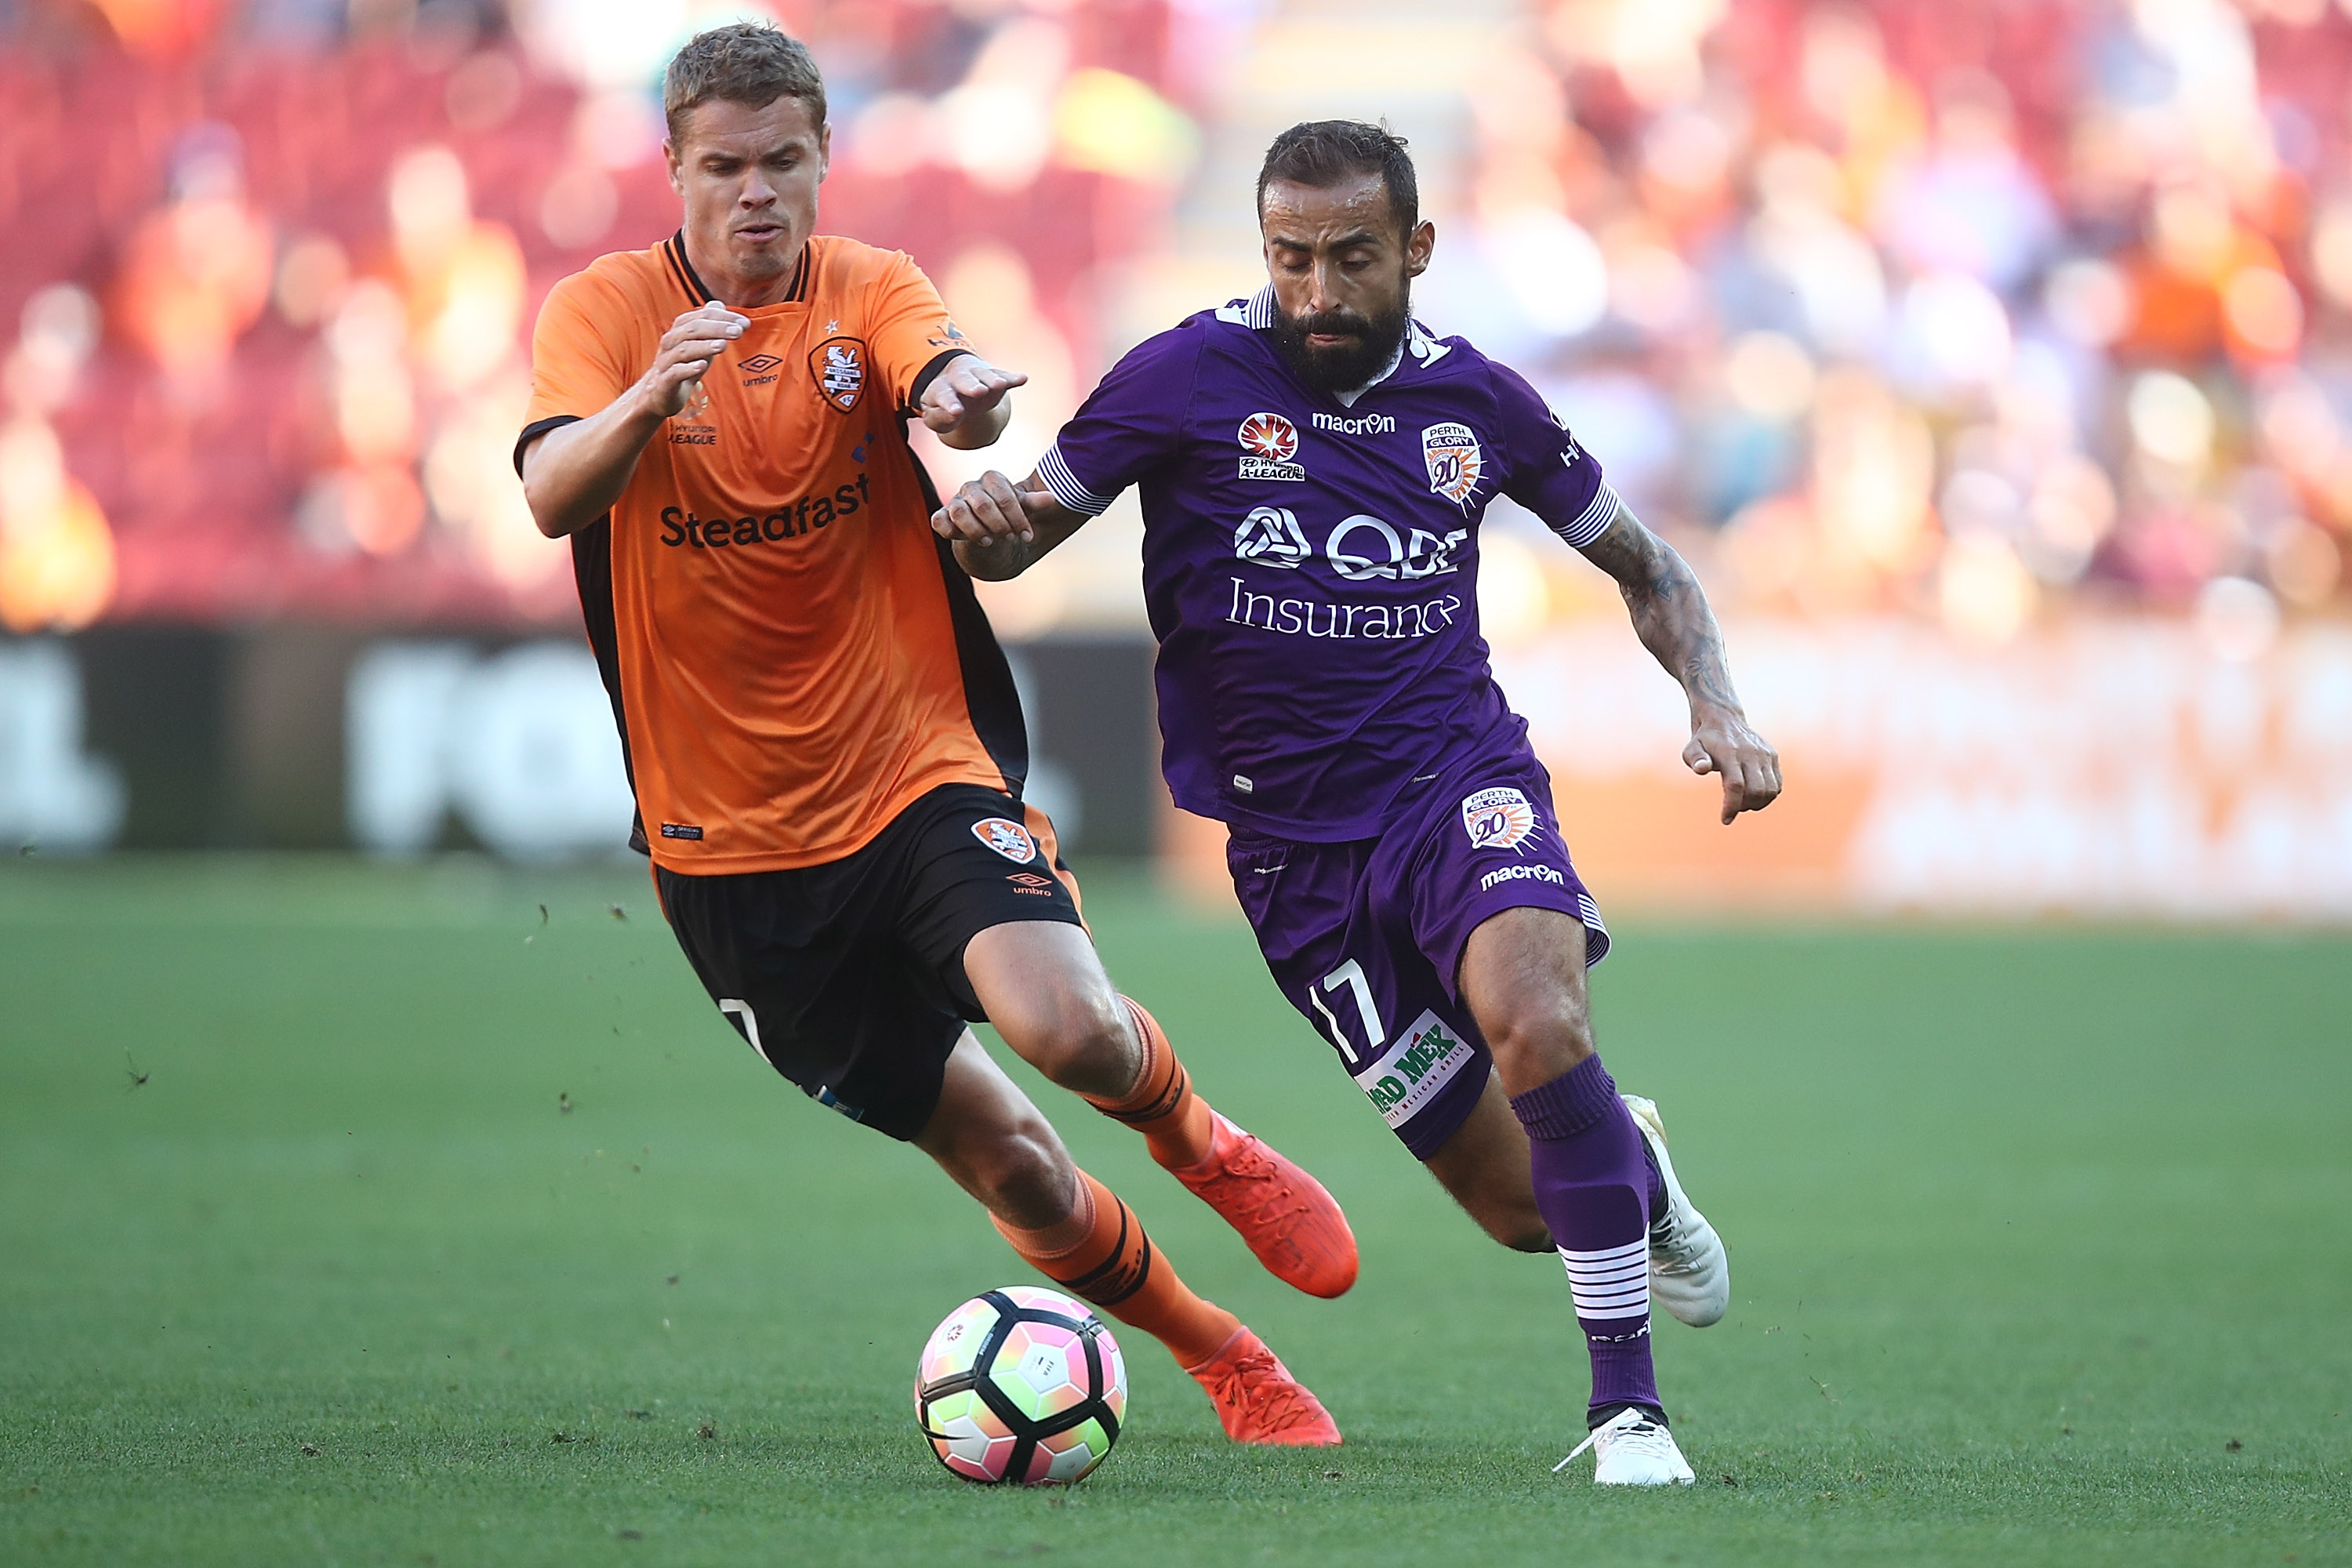 #BRIvSYD - Roar midfielder Thomas Kristensen has made 24 tackles so far this Hyundai A-League season, the second-most of any player and only four behind Michael Zullo (28).